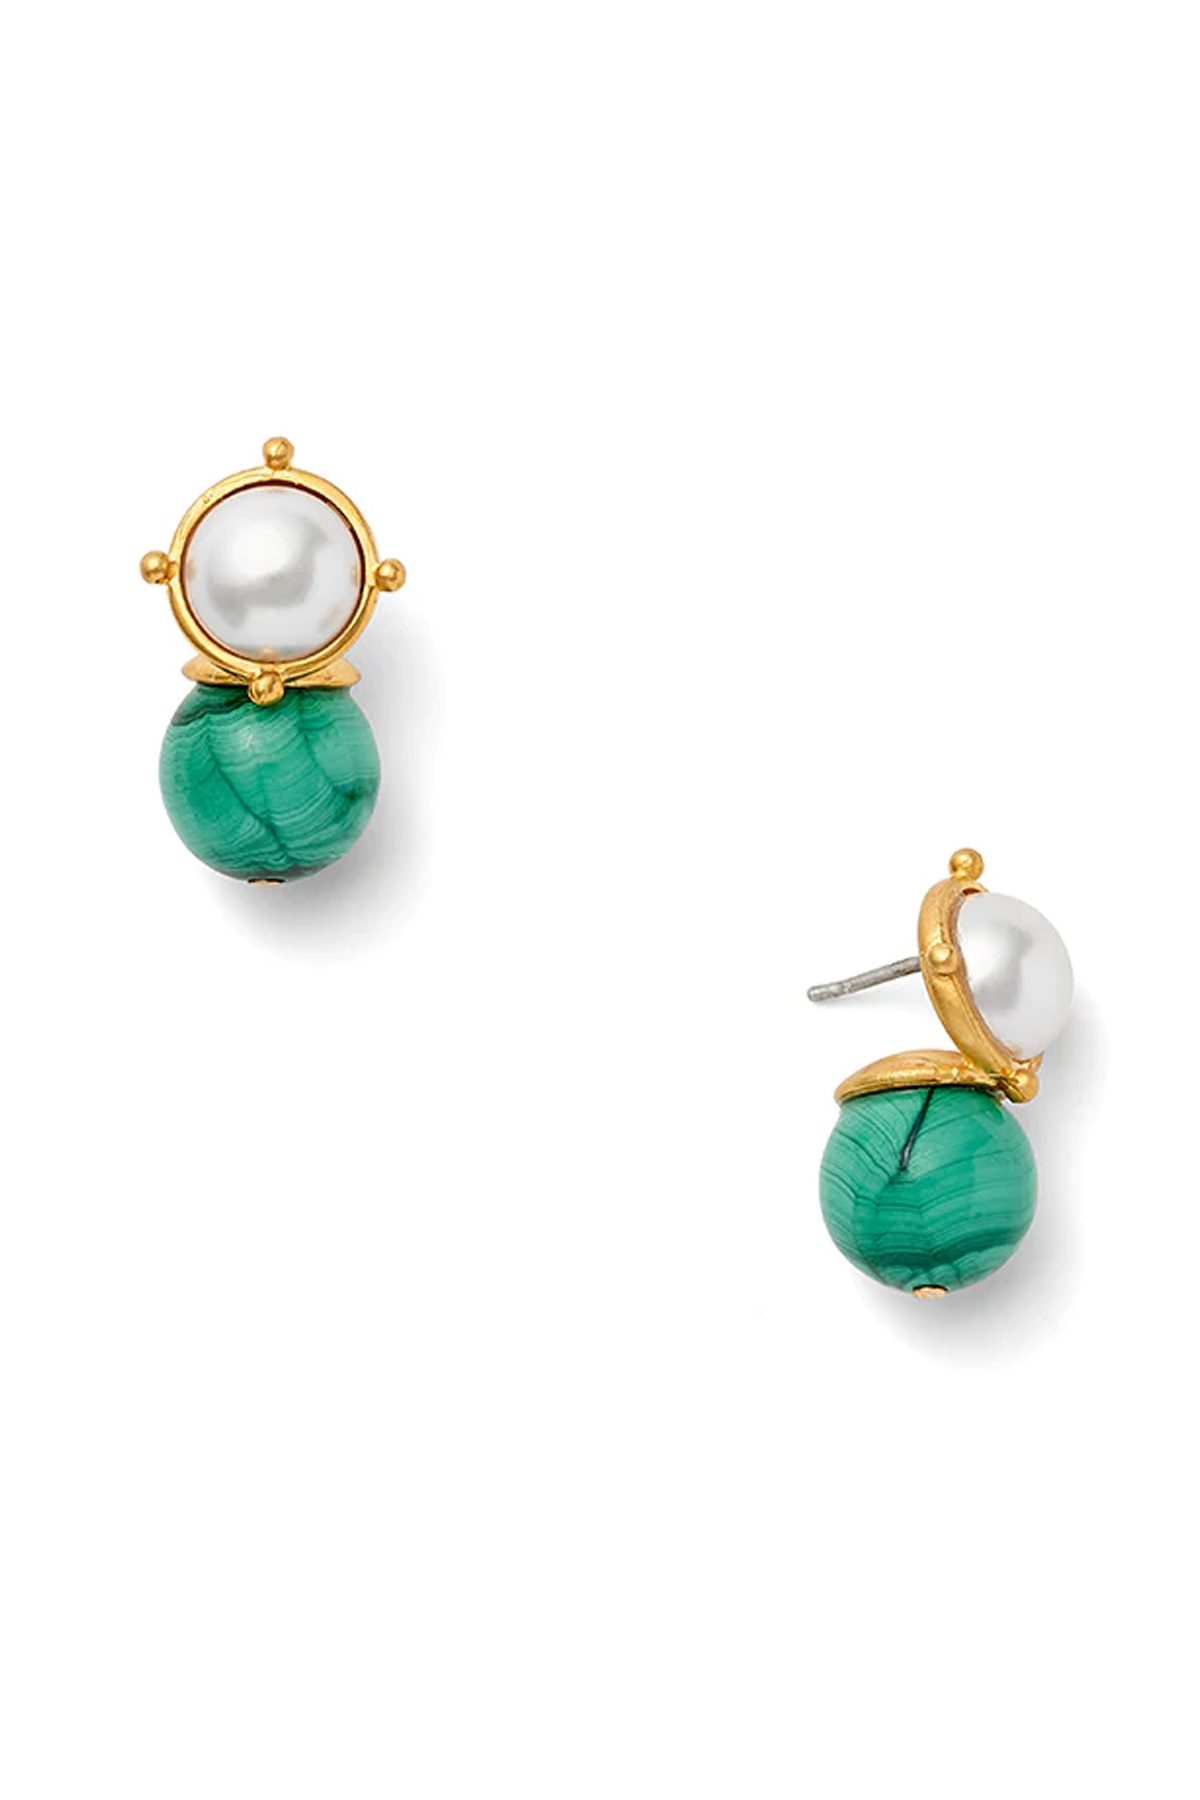 Pearl and Green earring